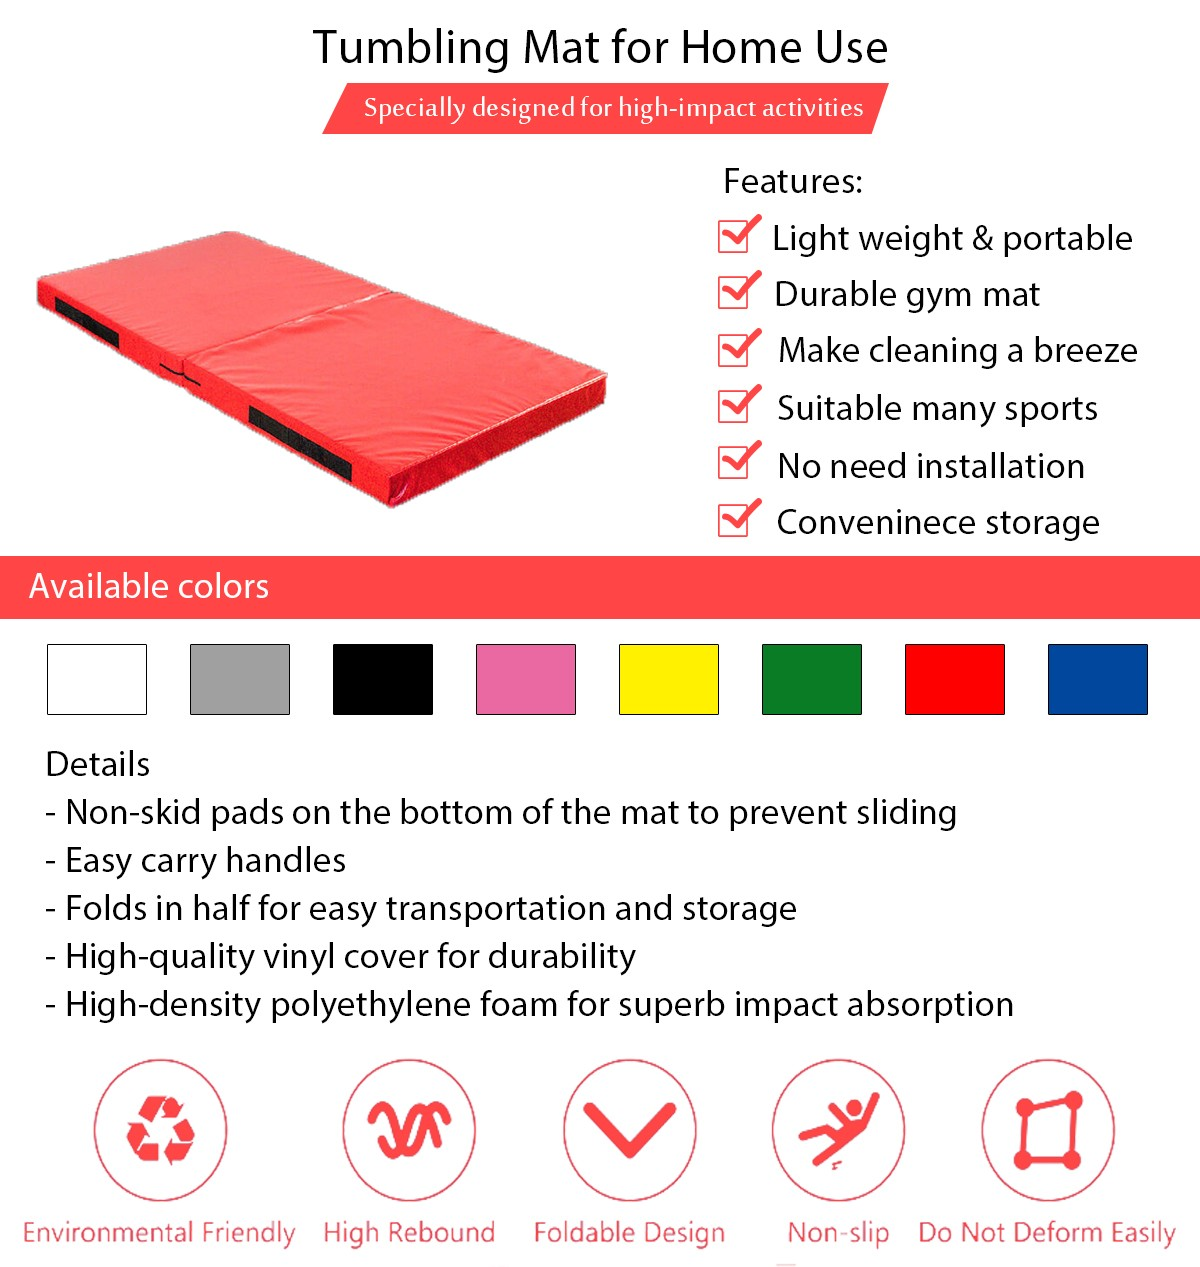 Tumbling Mat for Home Use